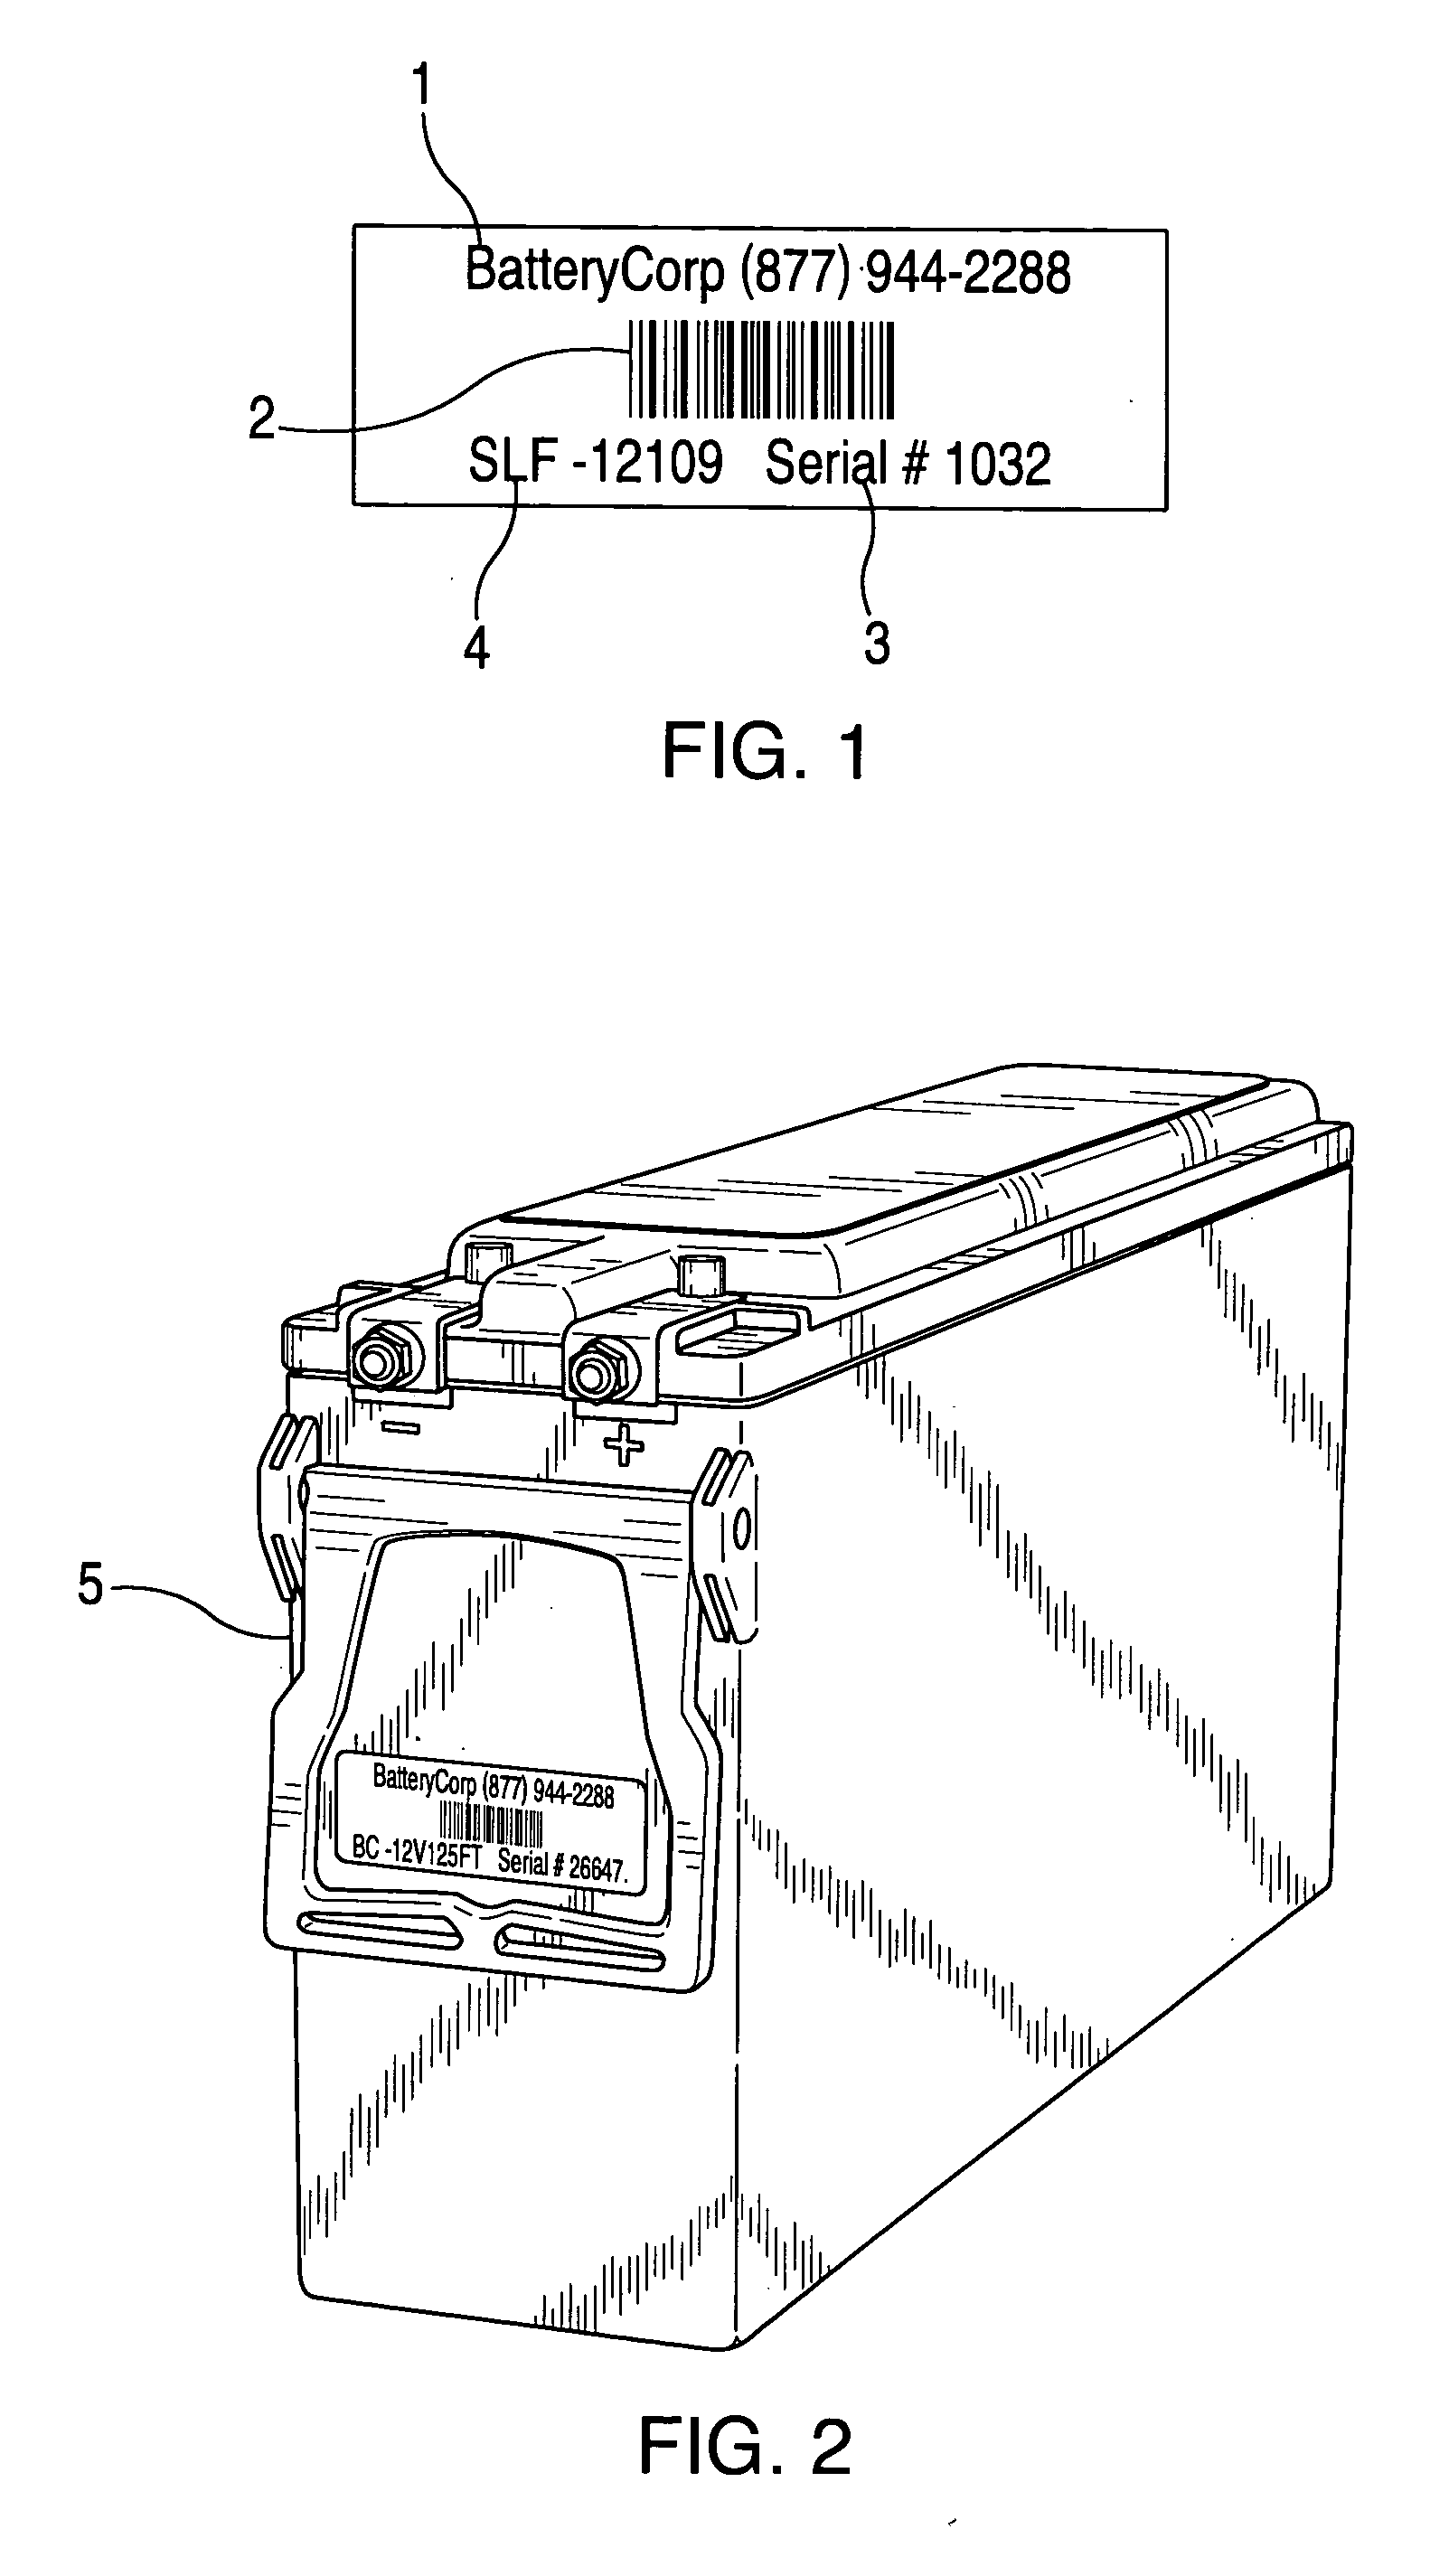 Battery management system and apparatus with anomaly reporting